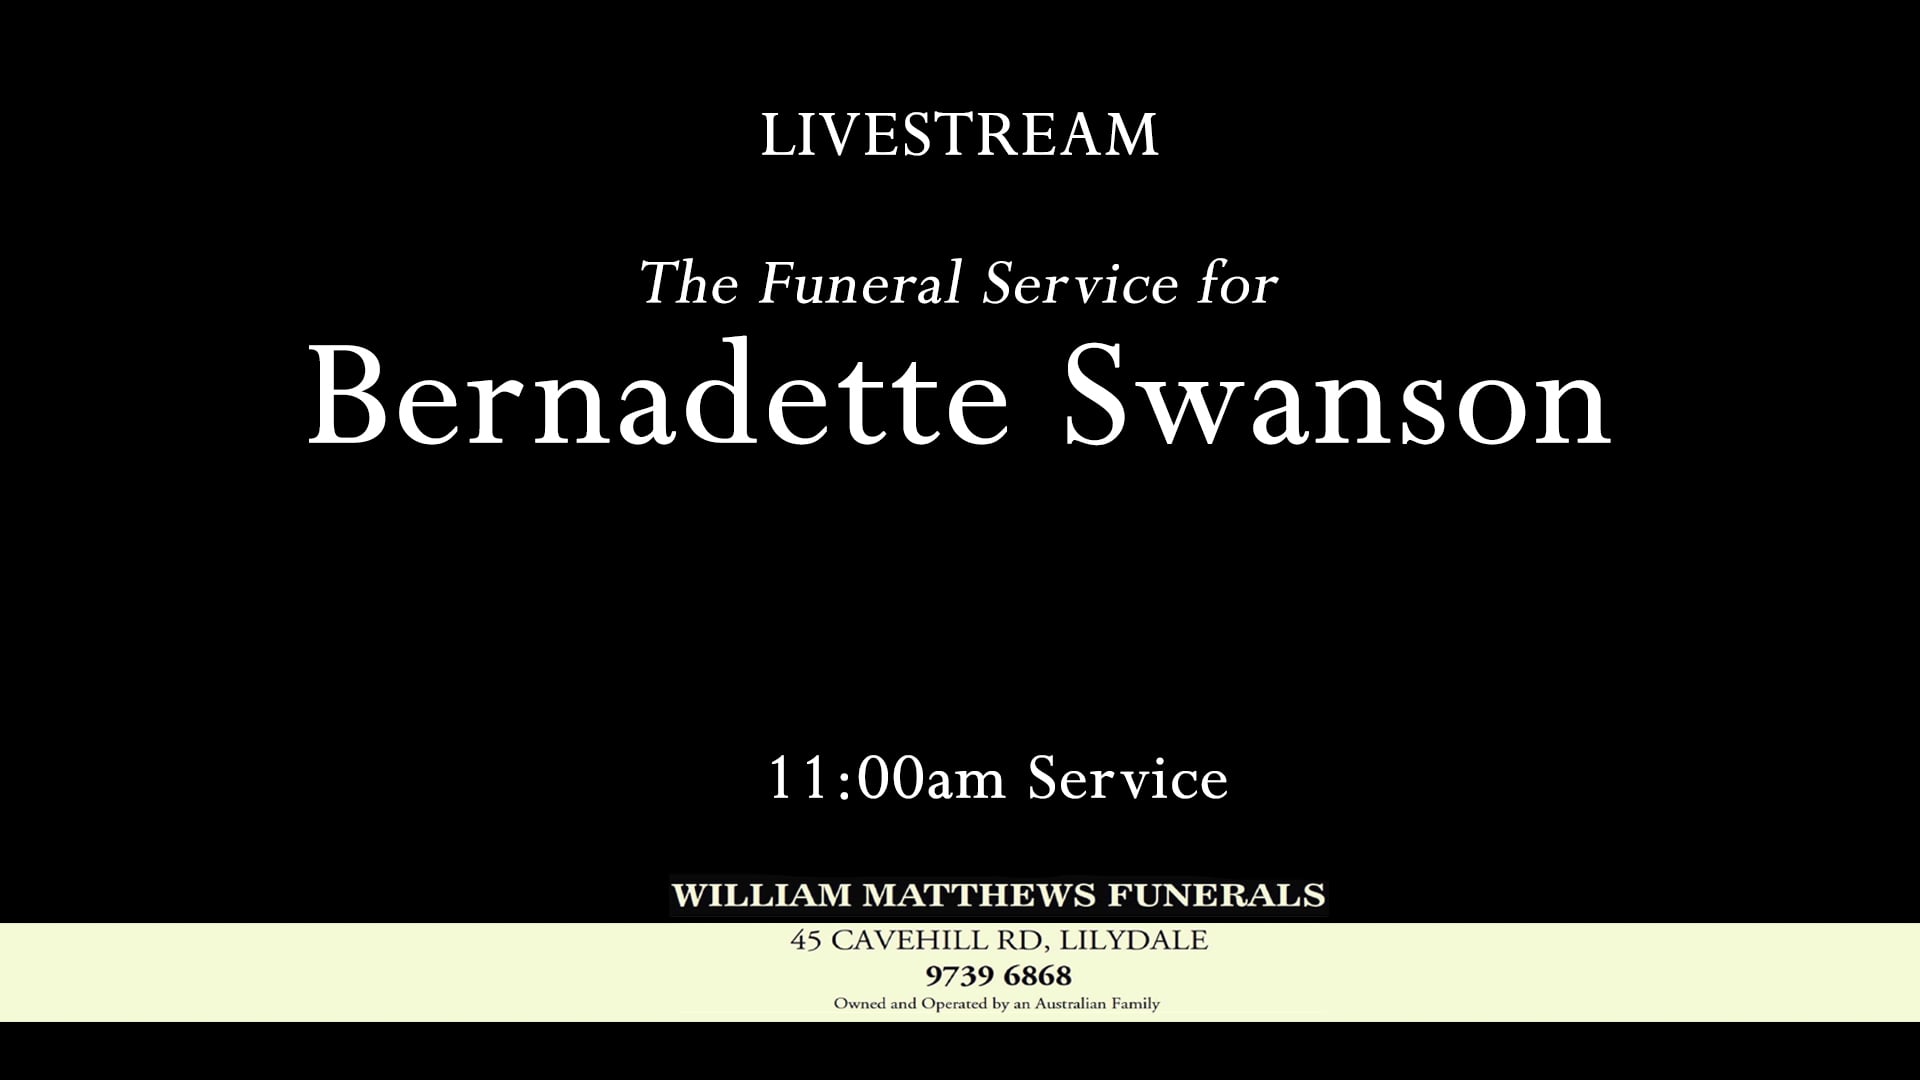 The Funeral Service for Bernadette Swanson